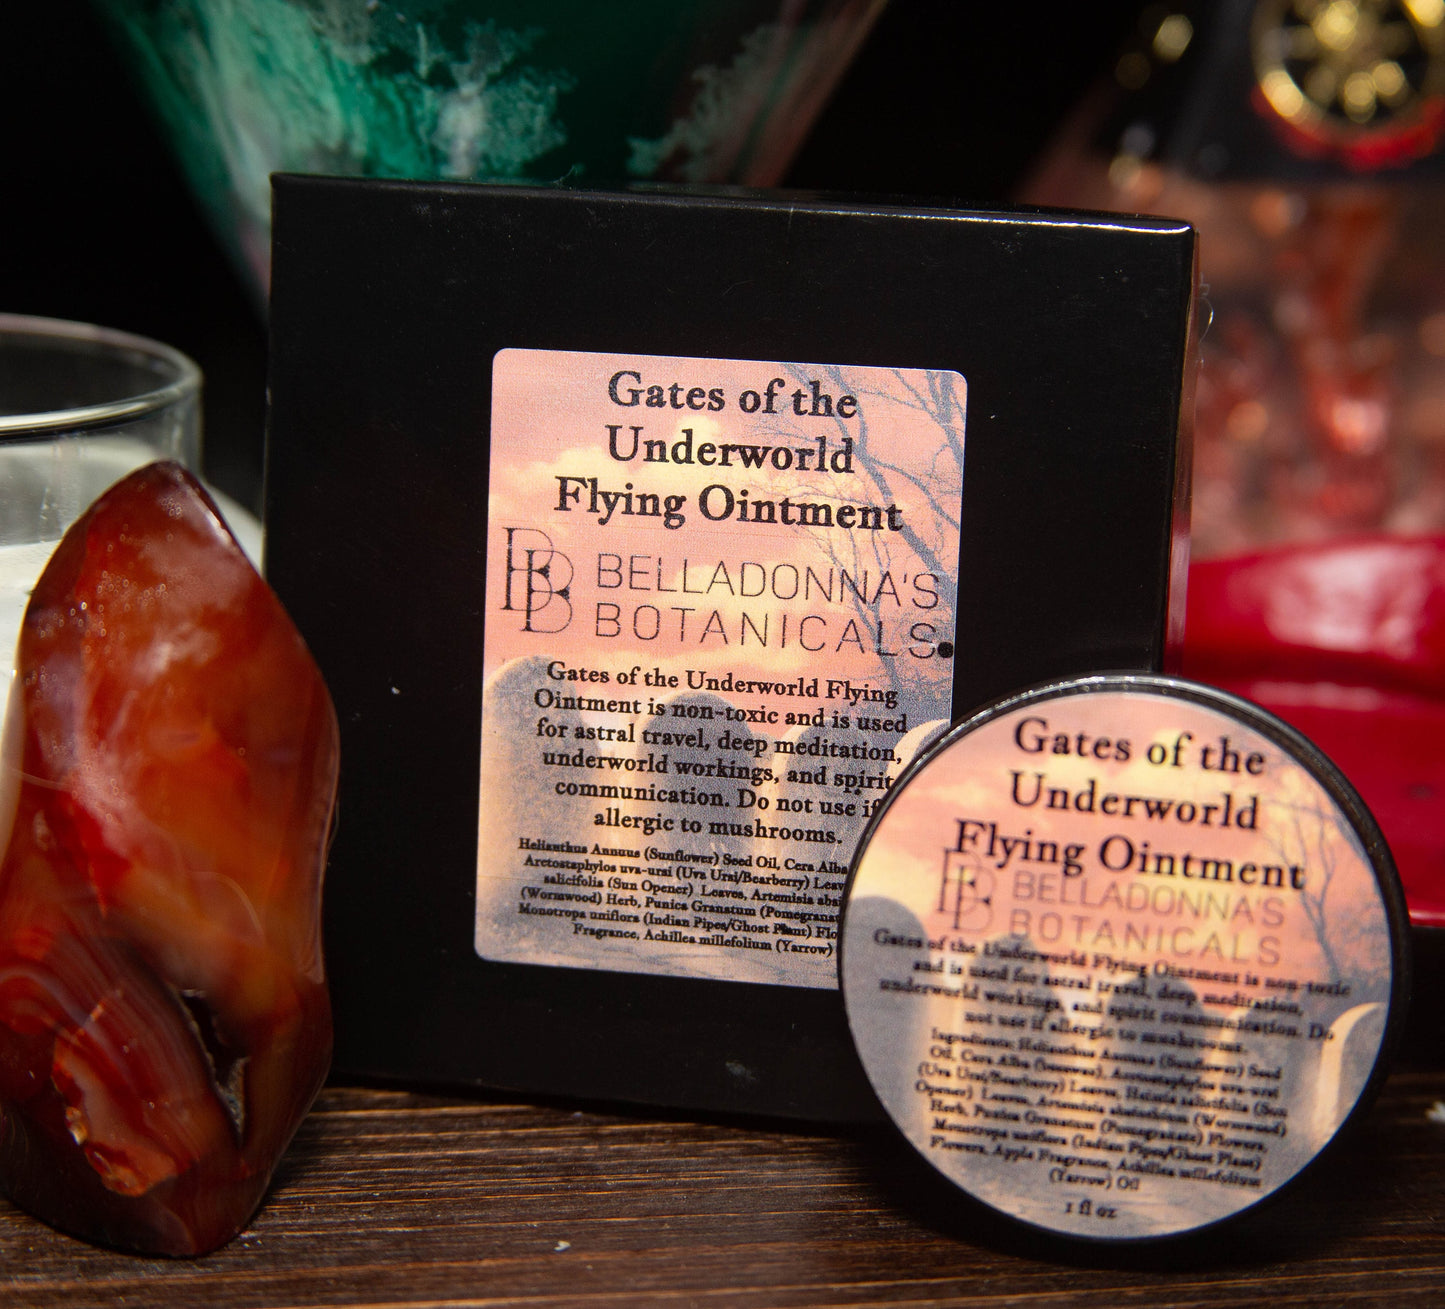 Gates of the Underworld Flying Ointment